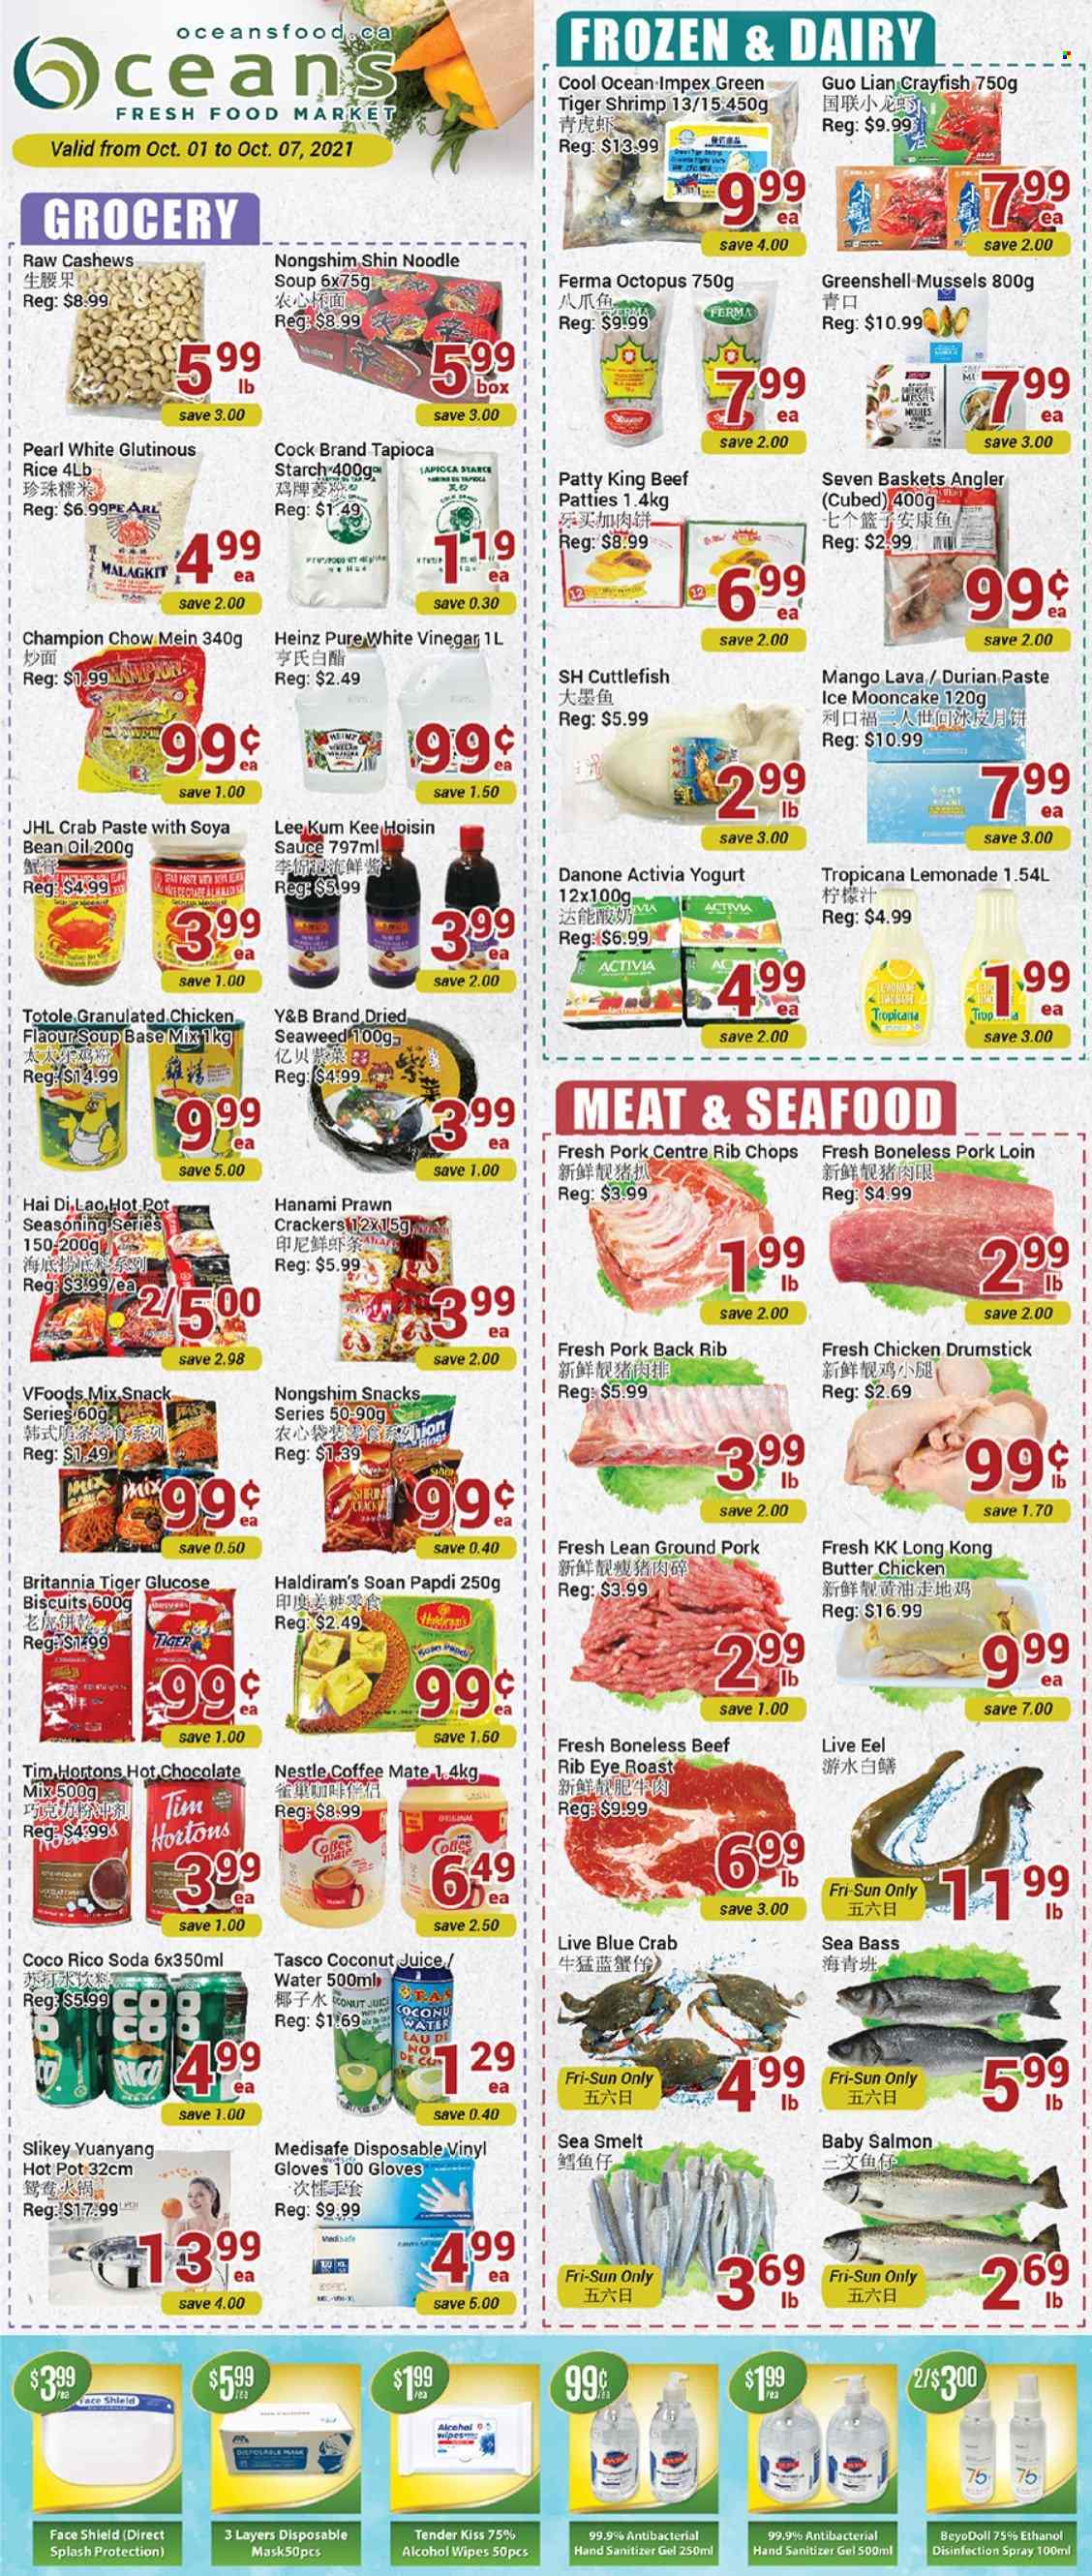 thumbnail - Oceans Flyer - October 01, 2021 - October 07, 2021 - Sales products - Ace, mango, cuttlefish, eel, mussels, salmon, sea bass, octopus, seafood, prawns, crab, shrimps, soup, sauce, noodles cup, noodles, yoghurt, Activia, Coffee-Mate, snack, crackers, biscuit, starch, tapioca starch, seaweed, Heinz, rice, spice, hoisin sauce, Lee Kum Kee, vinegar, oil, cashews, lemonade, juice, soda, hot chocolate, beef meat, ground pork, pork loin, pork meat, rib chops, wipes, hand sanitizer, Danone, Nestlé. Page 1.